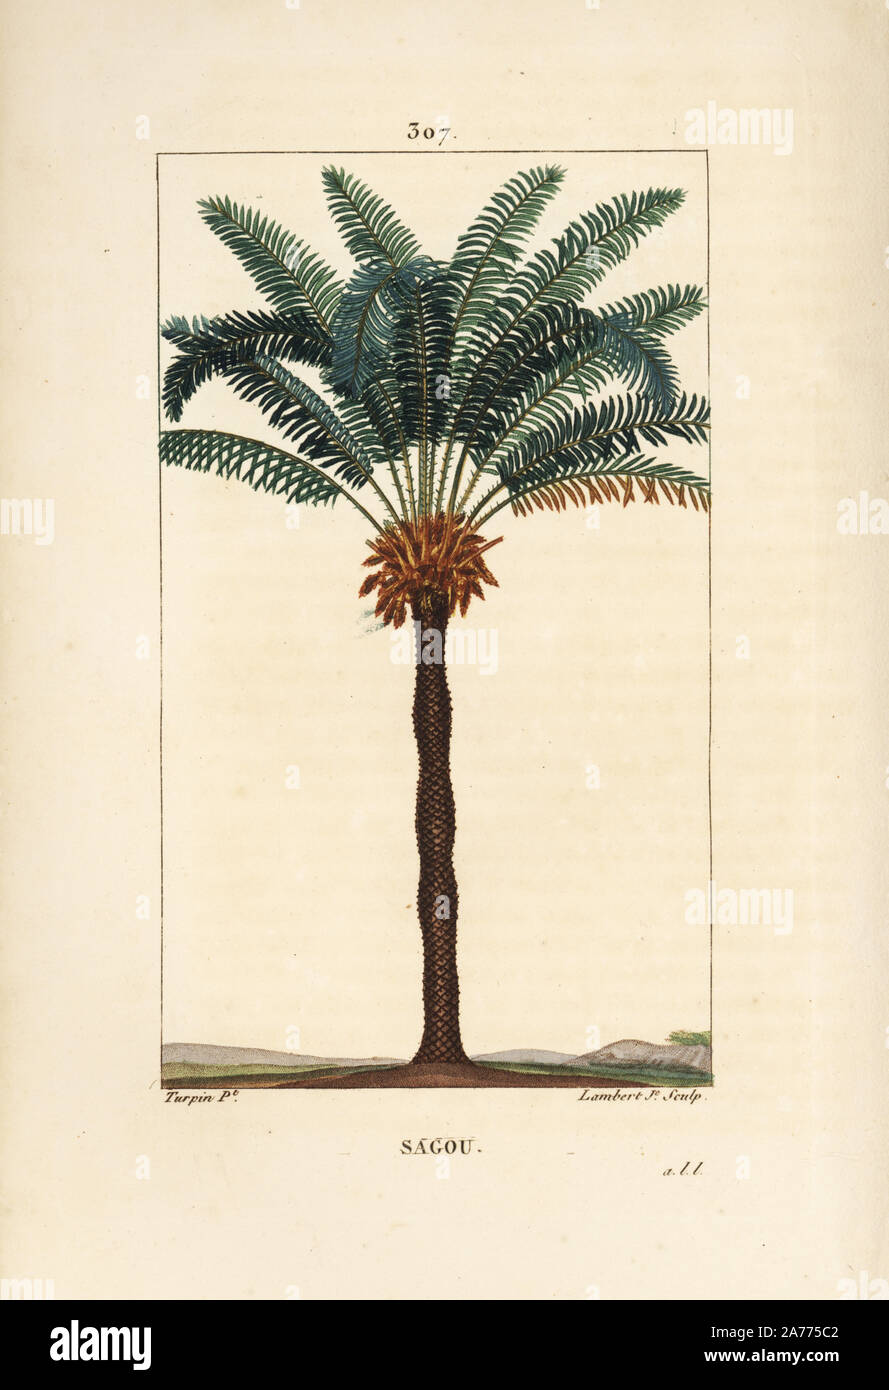 Queen sago, Cycas circinalis, showing leaf, seed and trunk. Endangered palm tree. Handcoloured stipple copperplate engraving by Lambert Junior from a drawing by Pierre Jean-Francois Turpin from Chaumeton, Poiret and Chamberet's 'La Flore Medicale,' Paris, Panckoucke, 1830. Turpin (17751840) was one of the three giants of French botanical art of the era alongside Pierre Joseph Redoute and Pancrace Bessa. Stock Photo